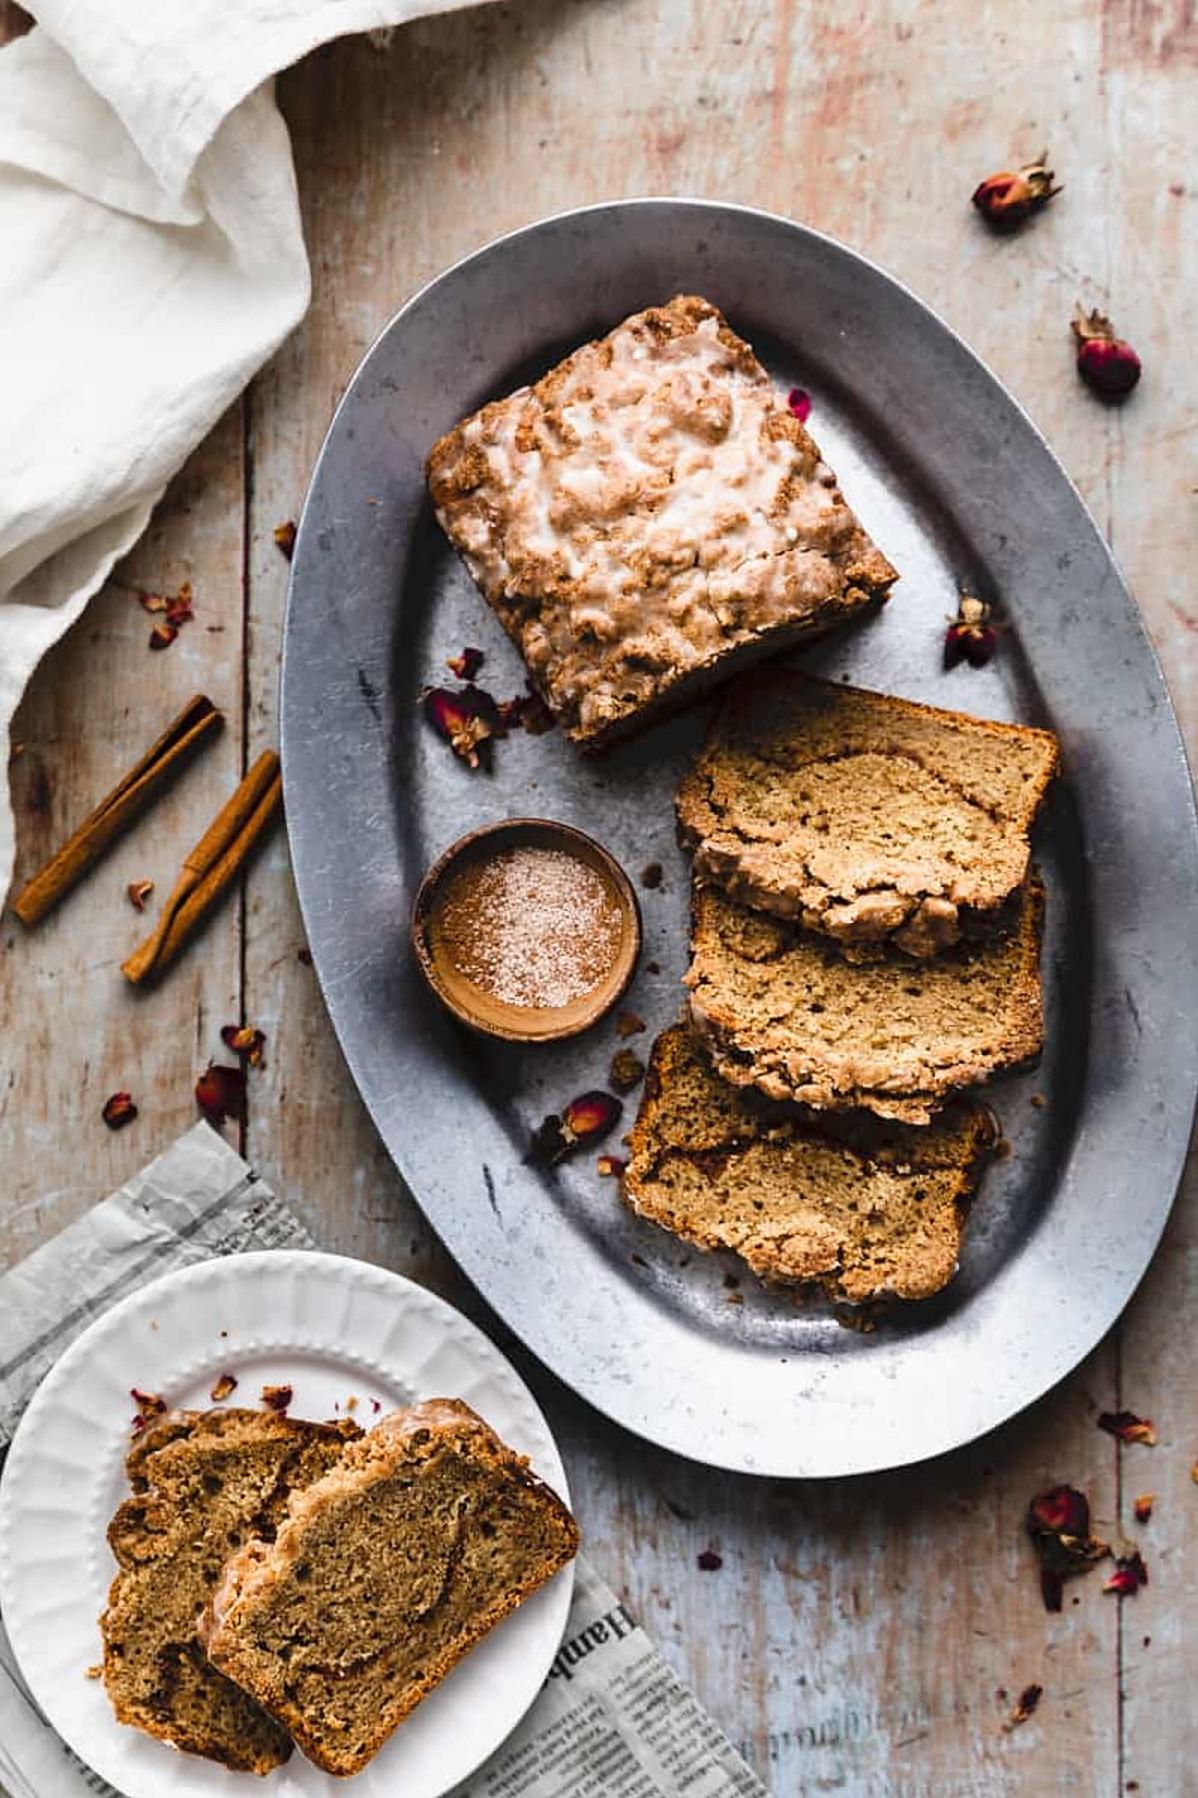  Can you resist a warm slice of coffee banana bread?